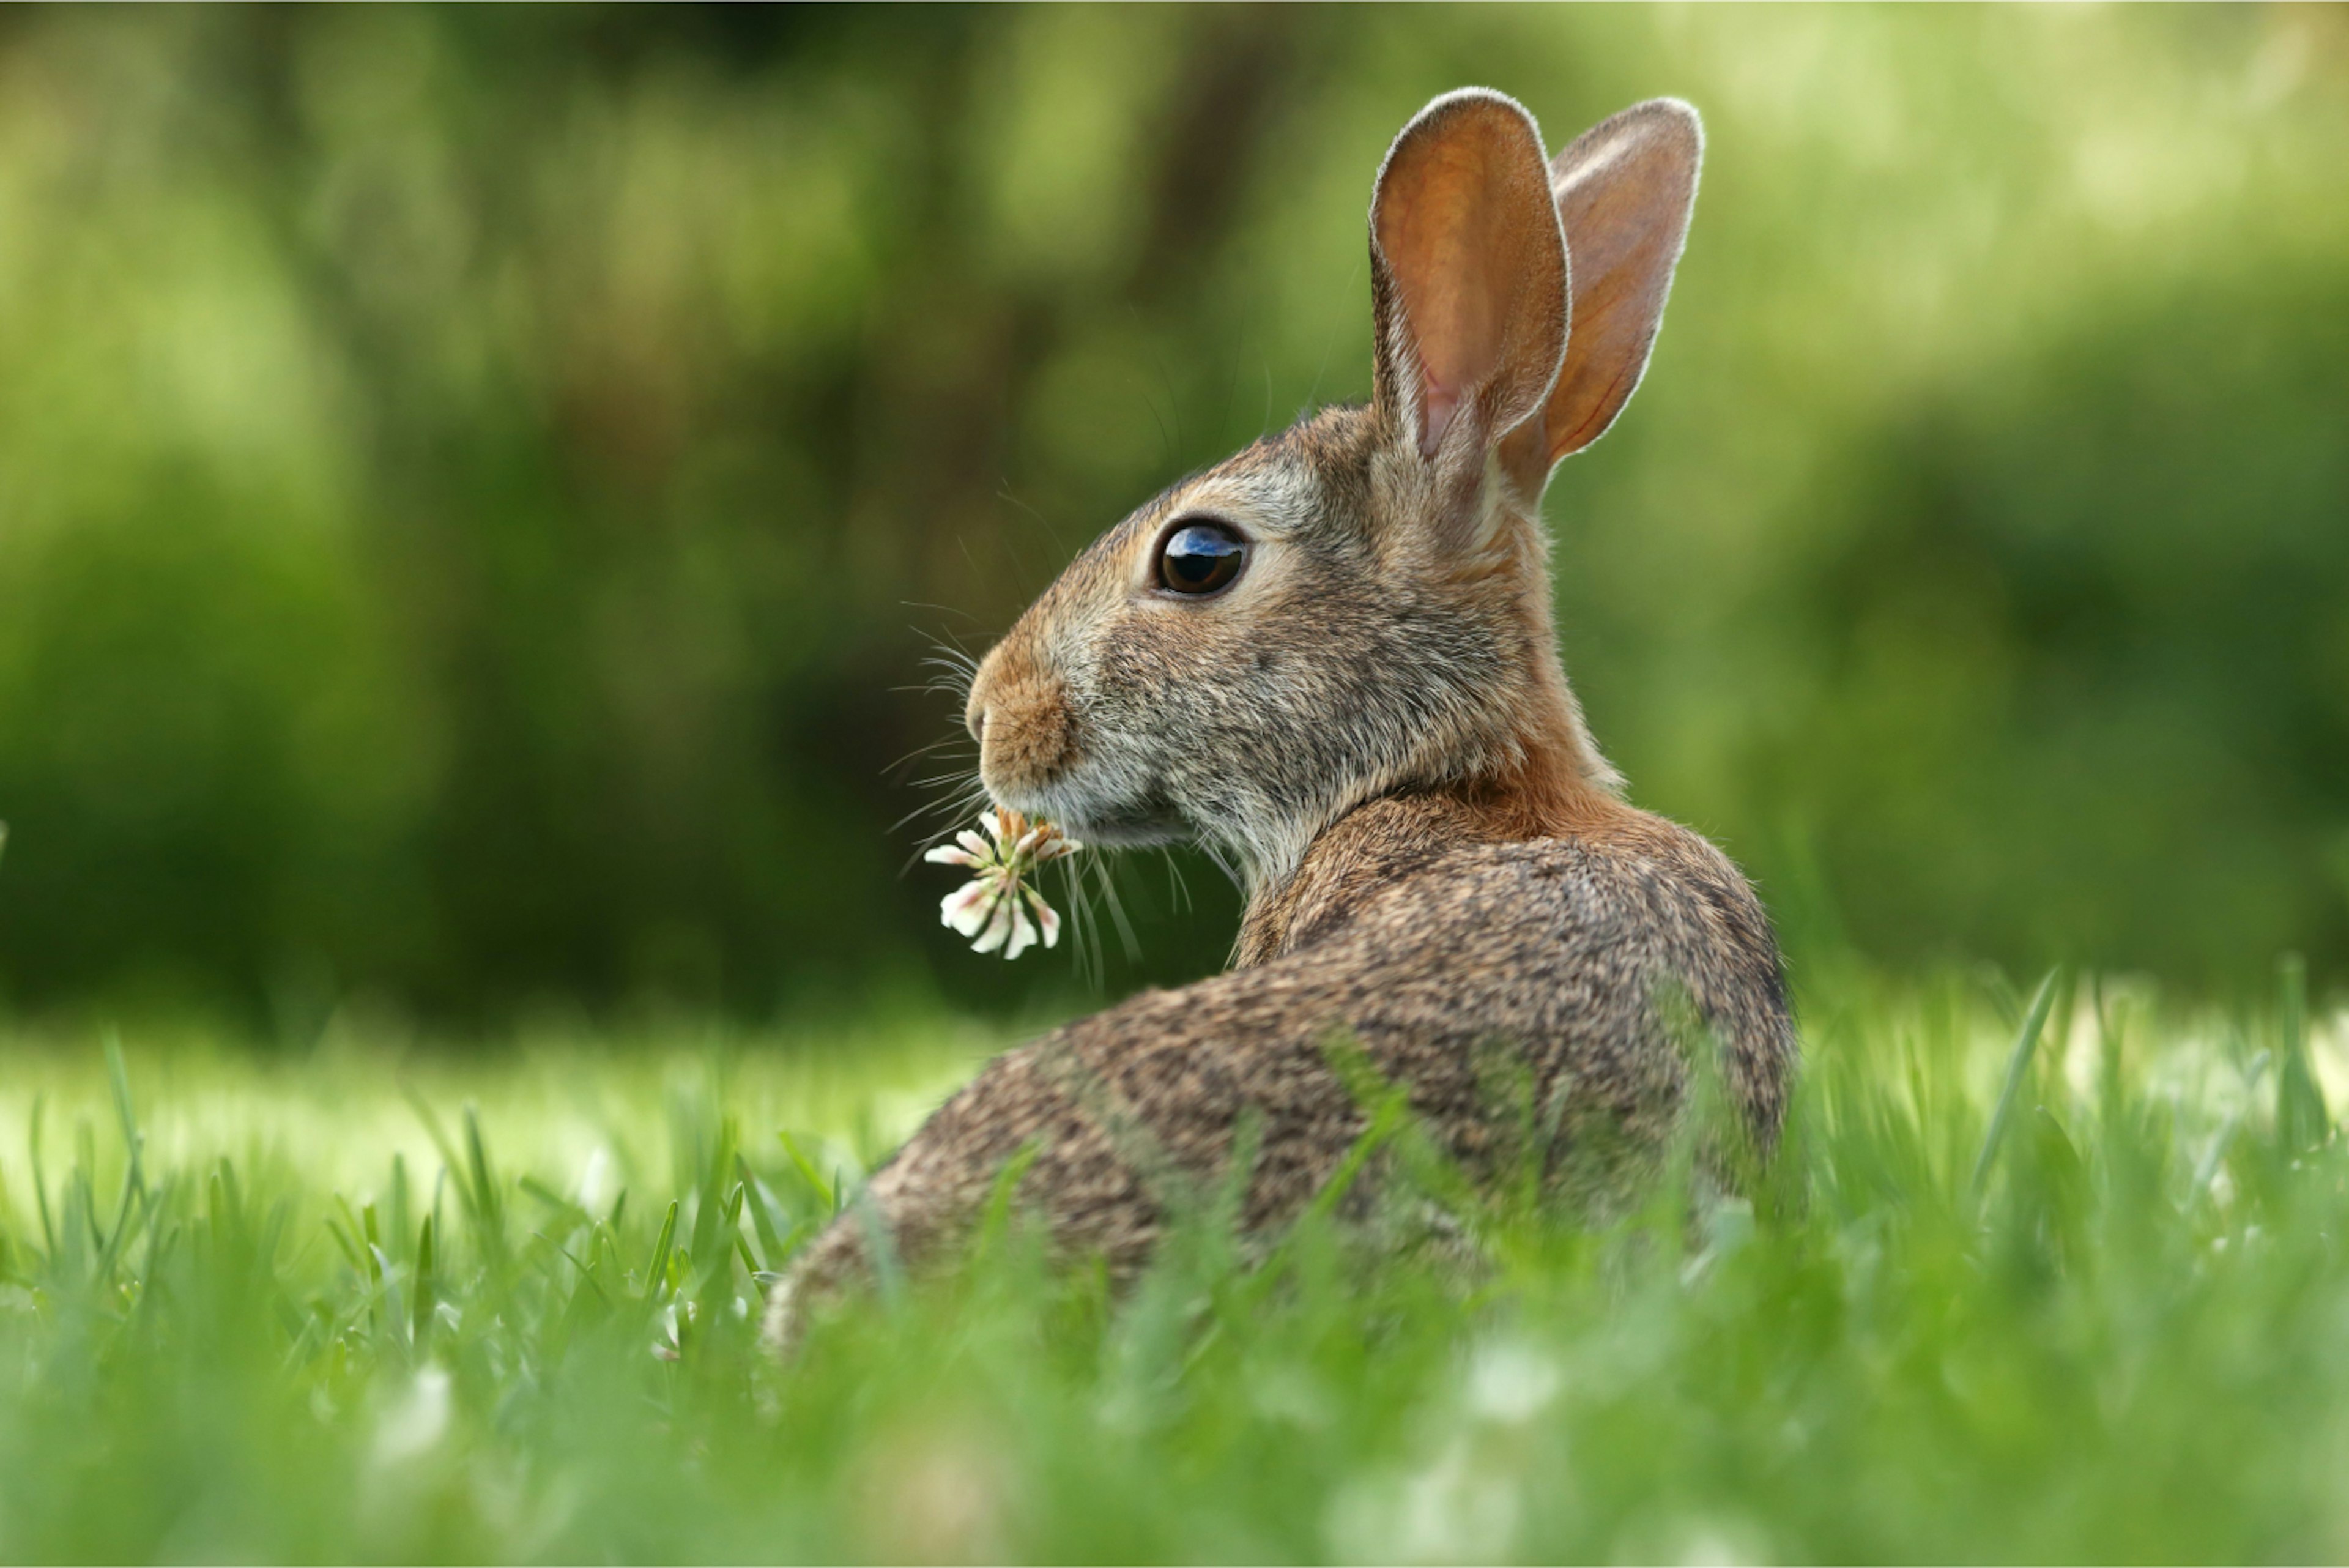 Bunny with flower in mouth.